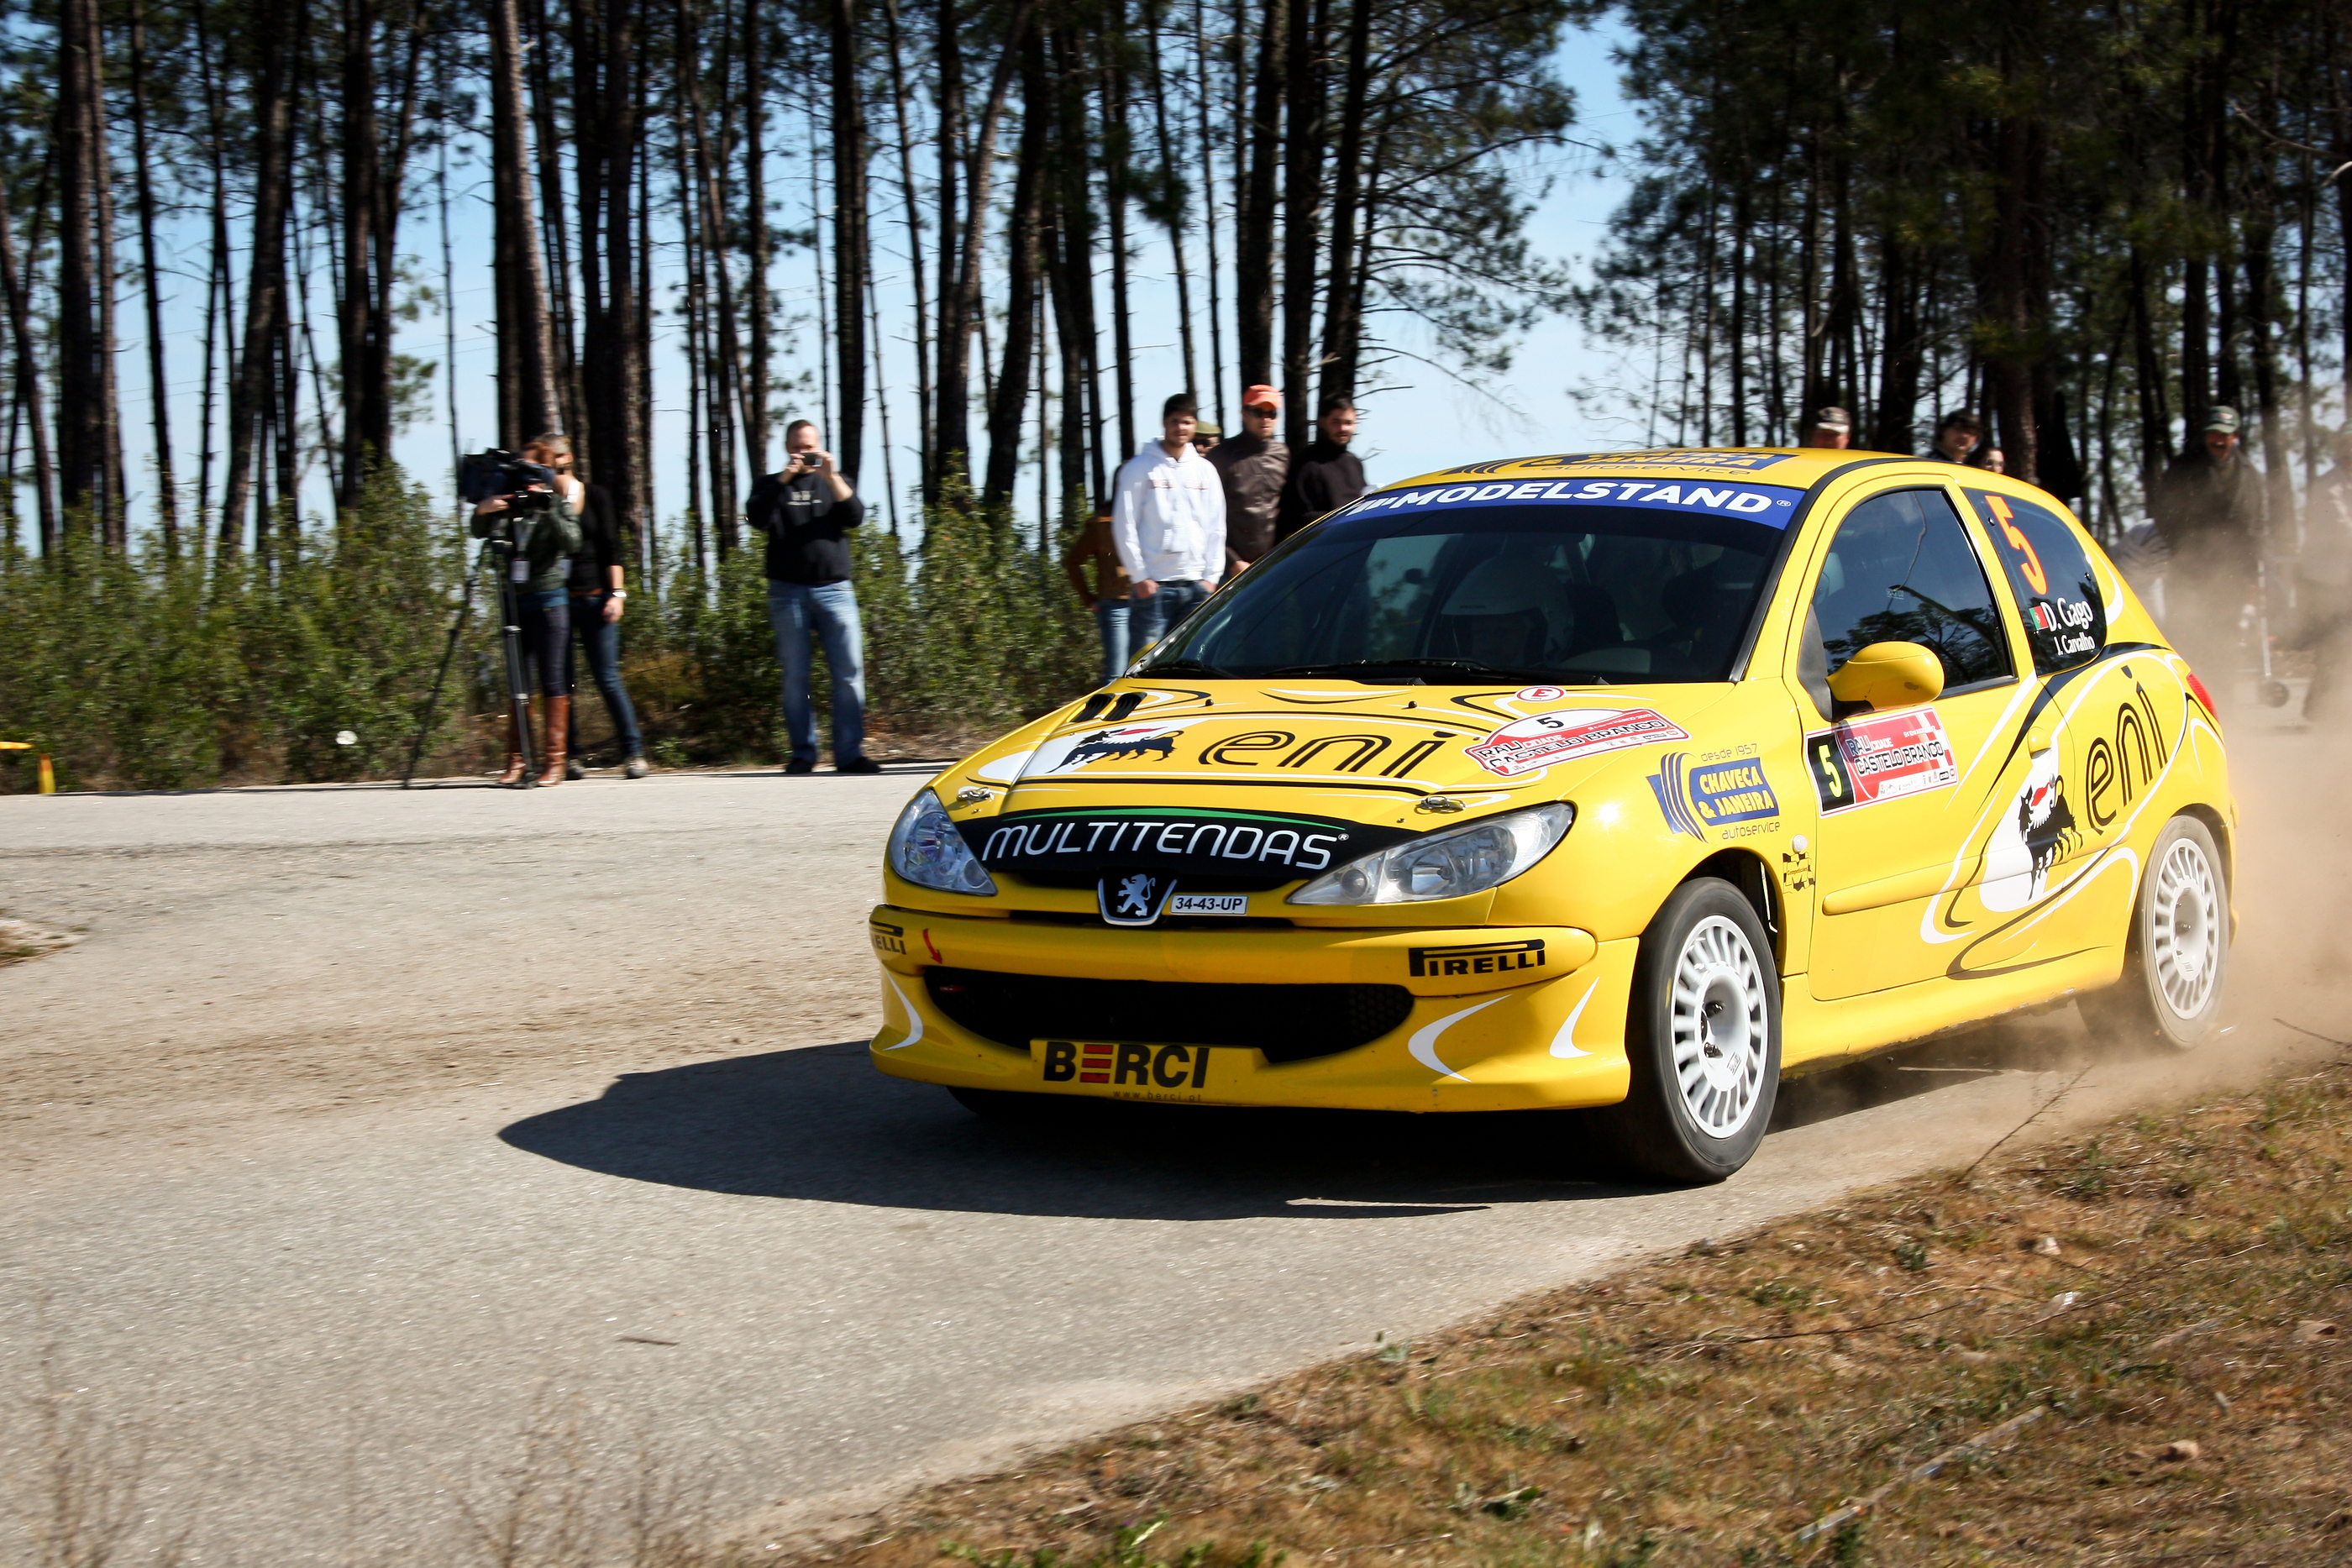 CASTELO BRANCO, PORTUGAL - MARCH 10: DIOGO GAGO DRIVES A PEUGEOT 206 GTI DURING RALLY CASTELO BRANCO BY COISAX